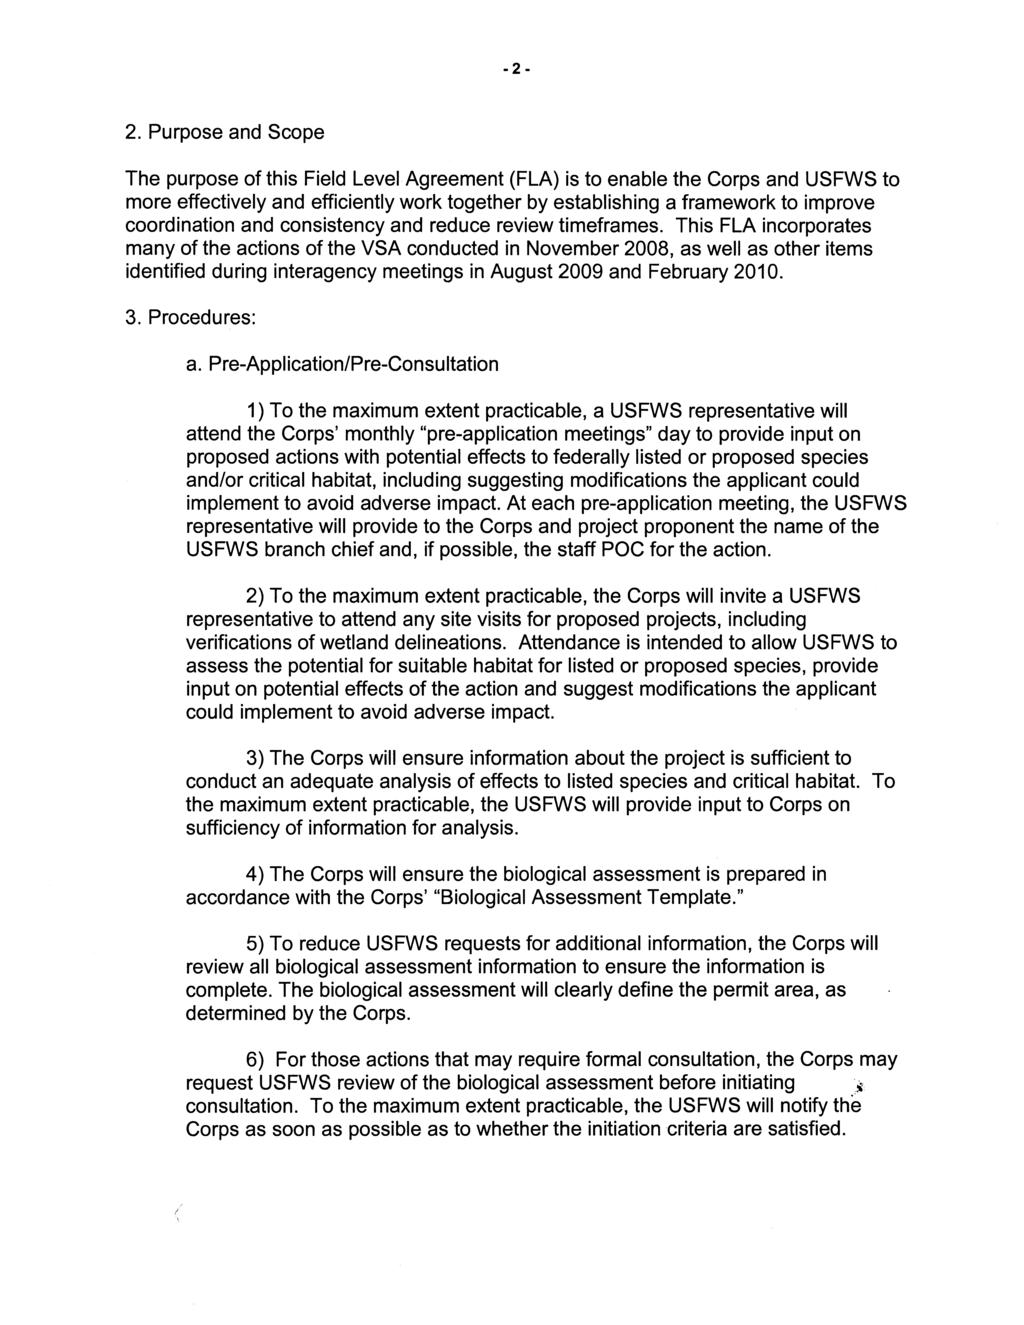 -2-2. Purpose and Scope The purpose of this Field Level Agreement (FLA) is to enable the Corps and USFWS to more effectively and efficiently work together by establishing a framework to improve